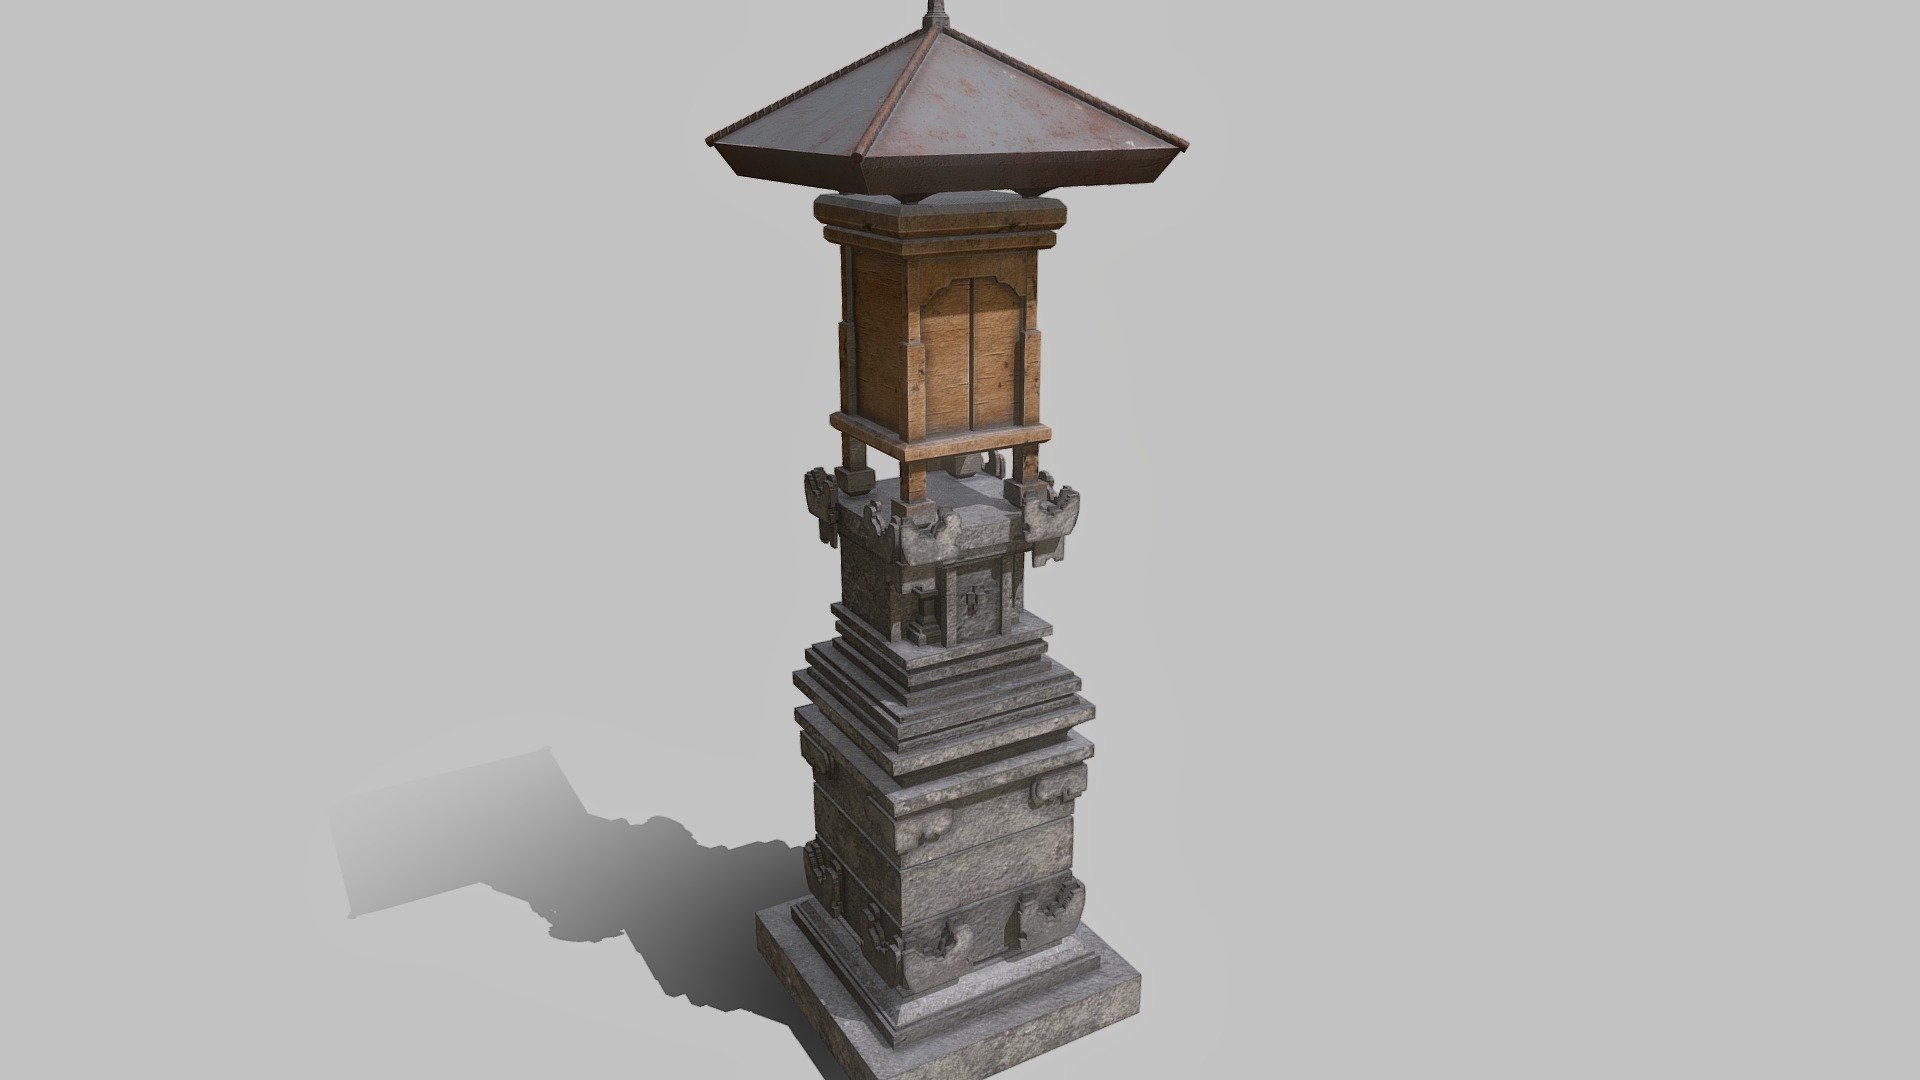 Game Asset Object Merajan / Sanggah From Bali Culture
Create = Blender 
Texturing = Substance Painter

About Merajan / Sanggah
Mrajan or Sanggah Pamerajan comes from the word: Sanggah, meaning Sanggar = holy place; Pamerajan comes from Praja = family. So Sanggah Pamerajan means = a sacred place for a certain family. For brevity, people call it in short: Sanggah, or Merajan - Merajan Bali Game Asset v3 for UNITY / UE - Buy Royalty Free 3D model by solodevelopment97 3d model